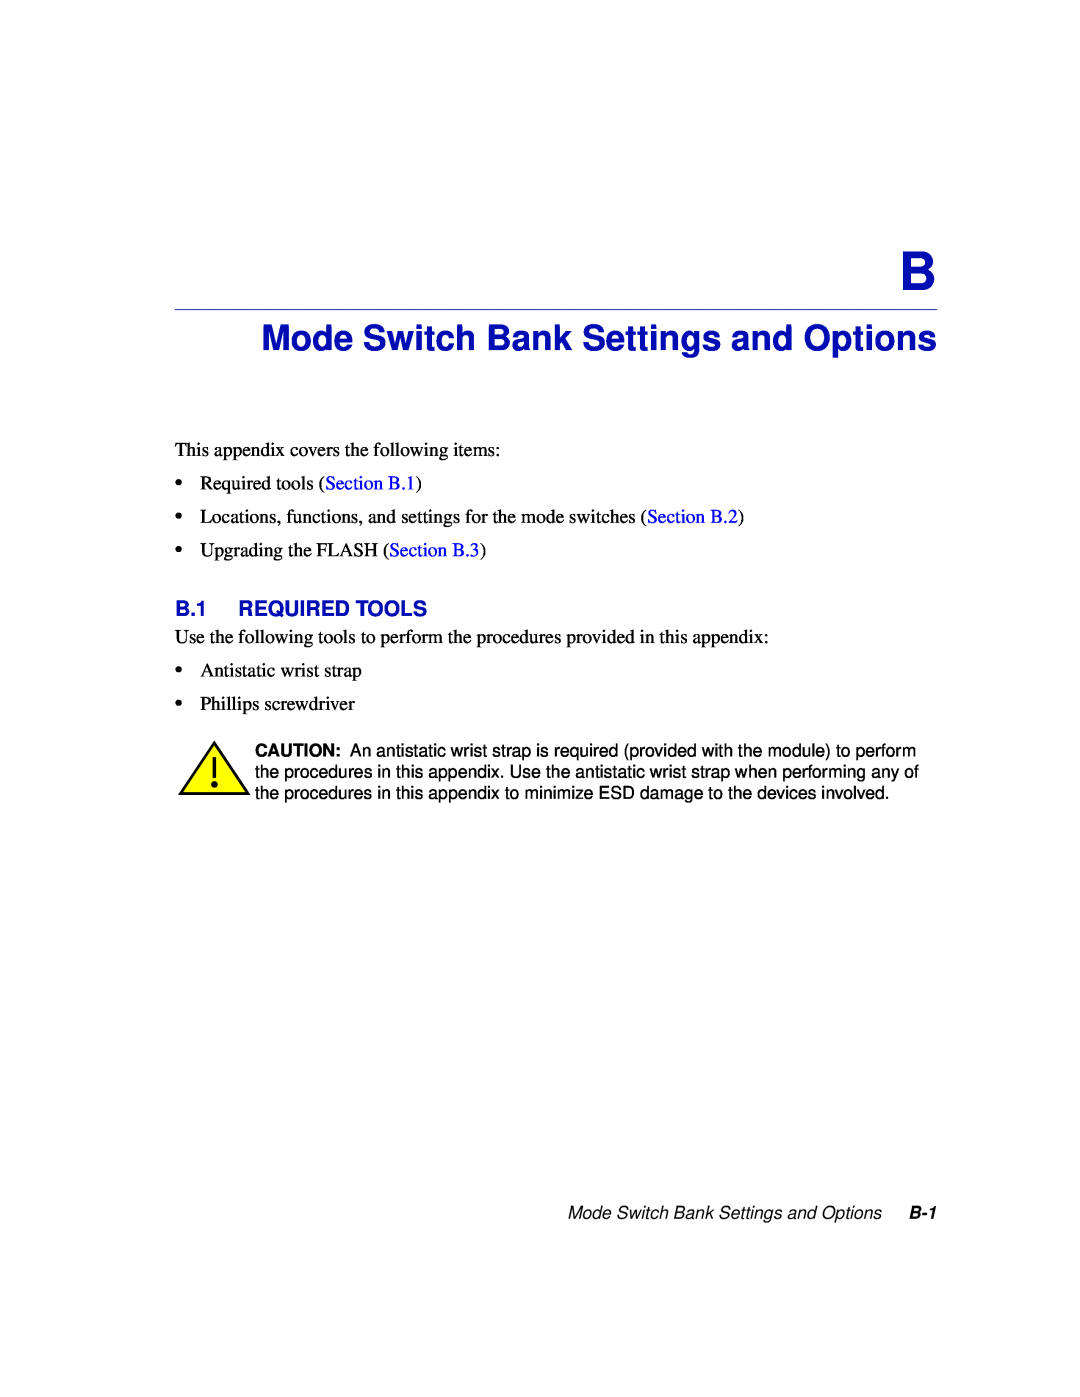 Enterasys Networks 6H302-48 manual Mode Switch Bank Settings and Options, B.1 REQUIRED TOOLS 